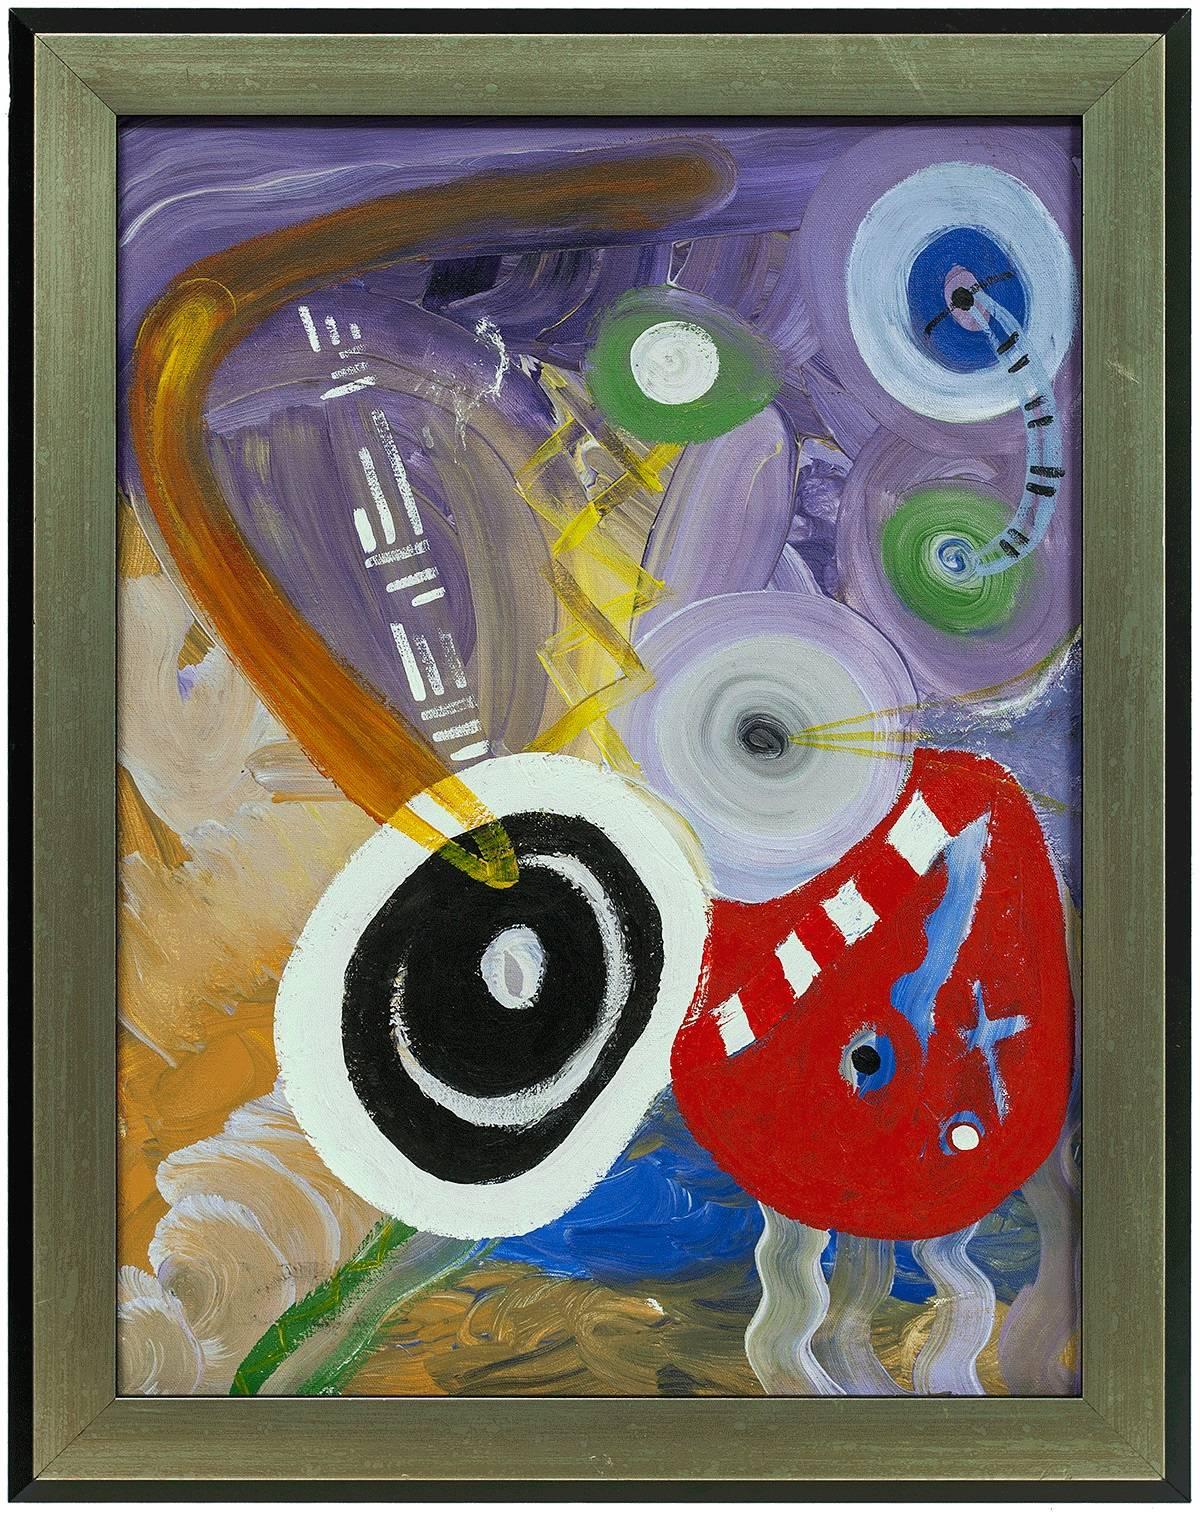 Genre: Modern
Subject: Abstract colorful
Medium: Acrylic
Surface: Canvas
Dimensions: 24" x 18" x 3/4"
Dimensions w/Frame: 27 1/2" x 21 1/2"

in the style of Cobra artists or rhino horn artists. A very vivid abstract painting.